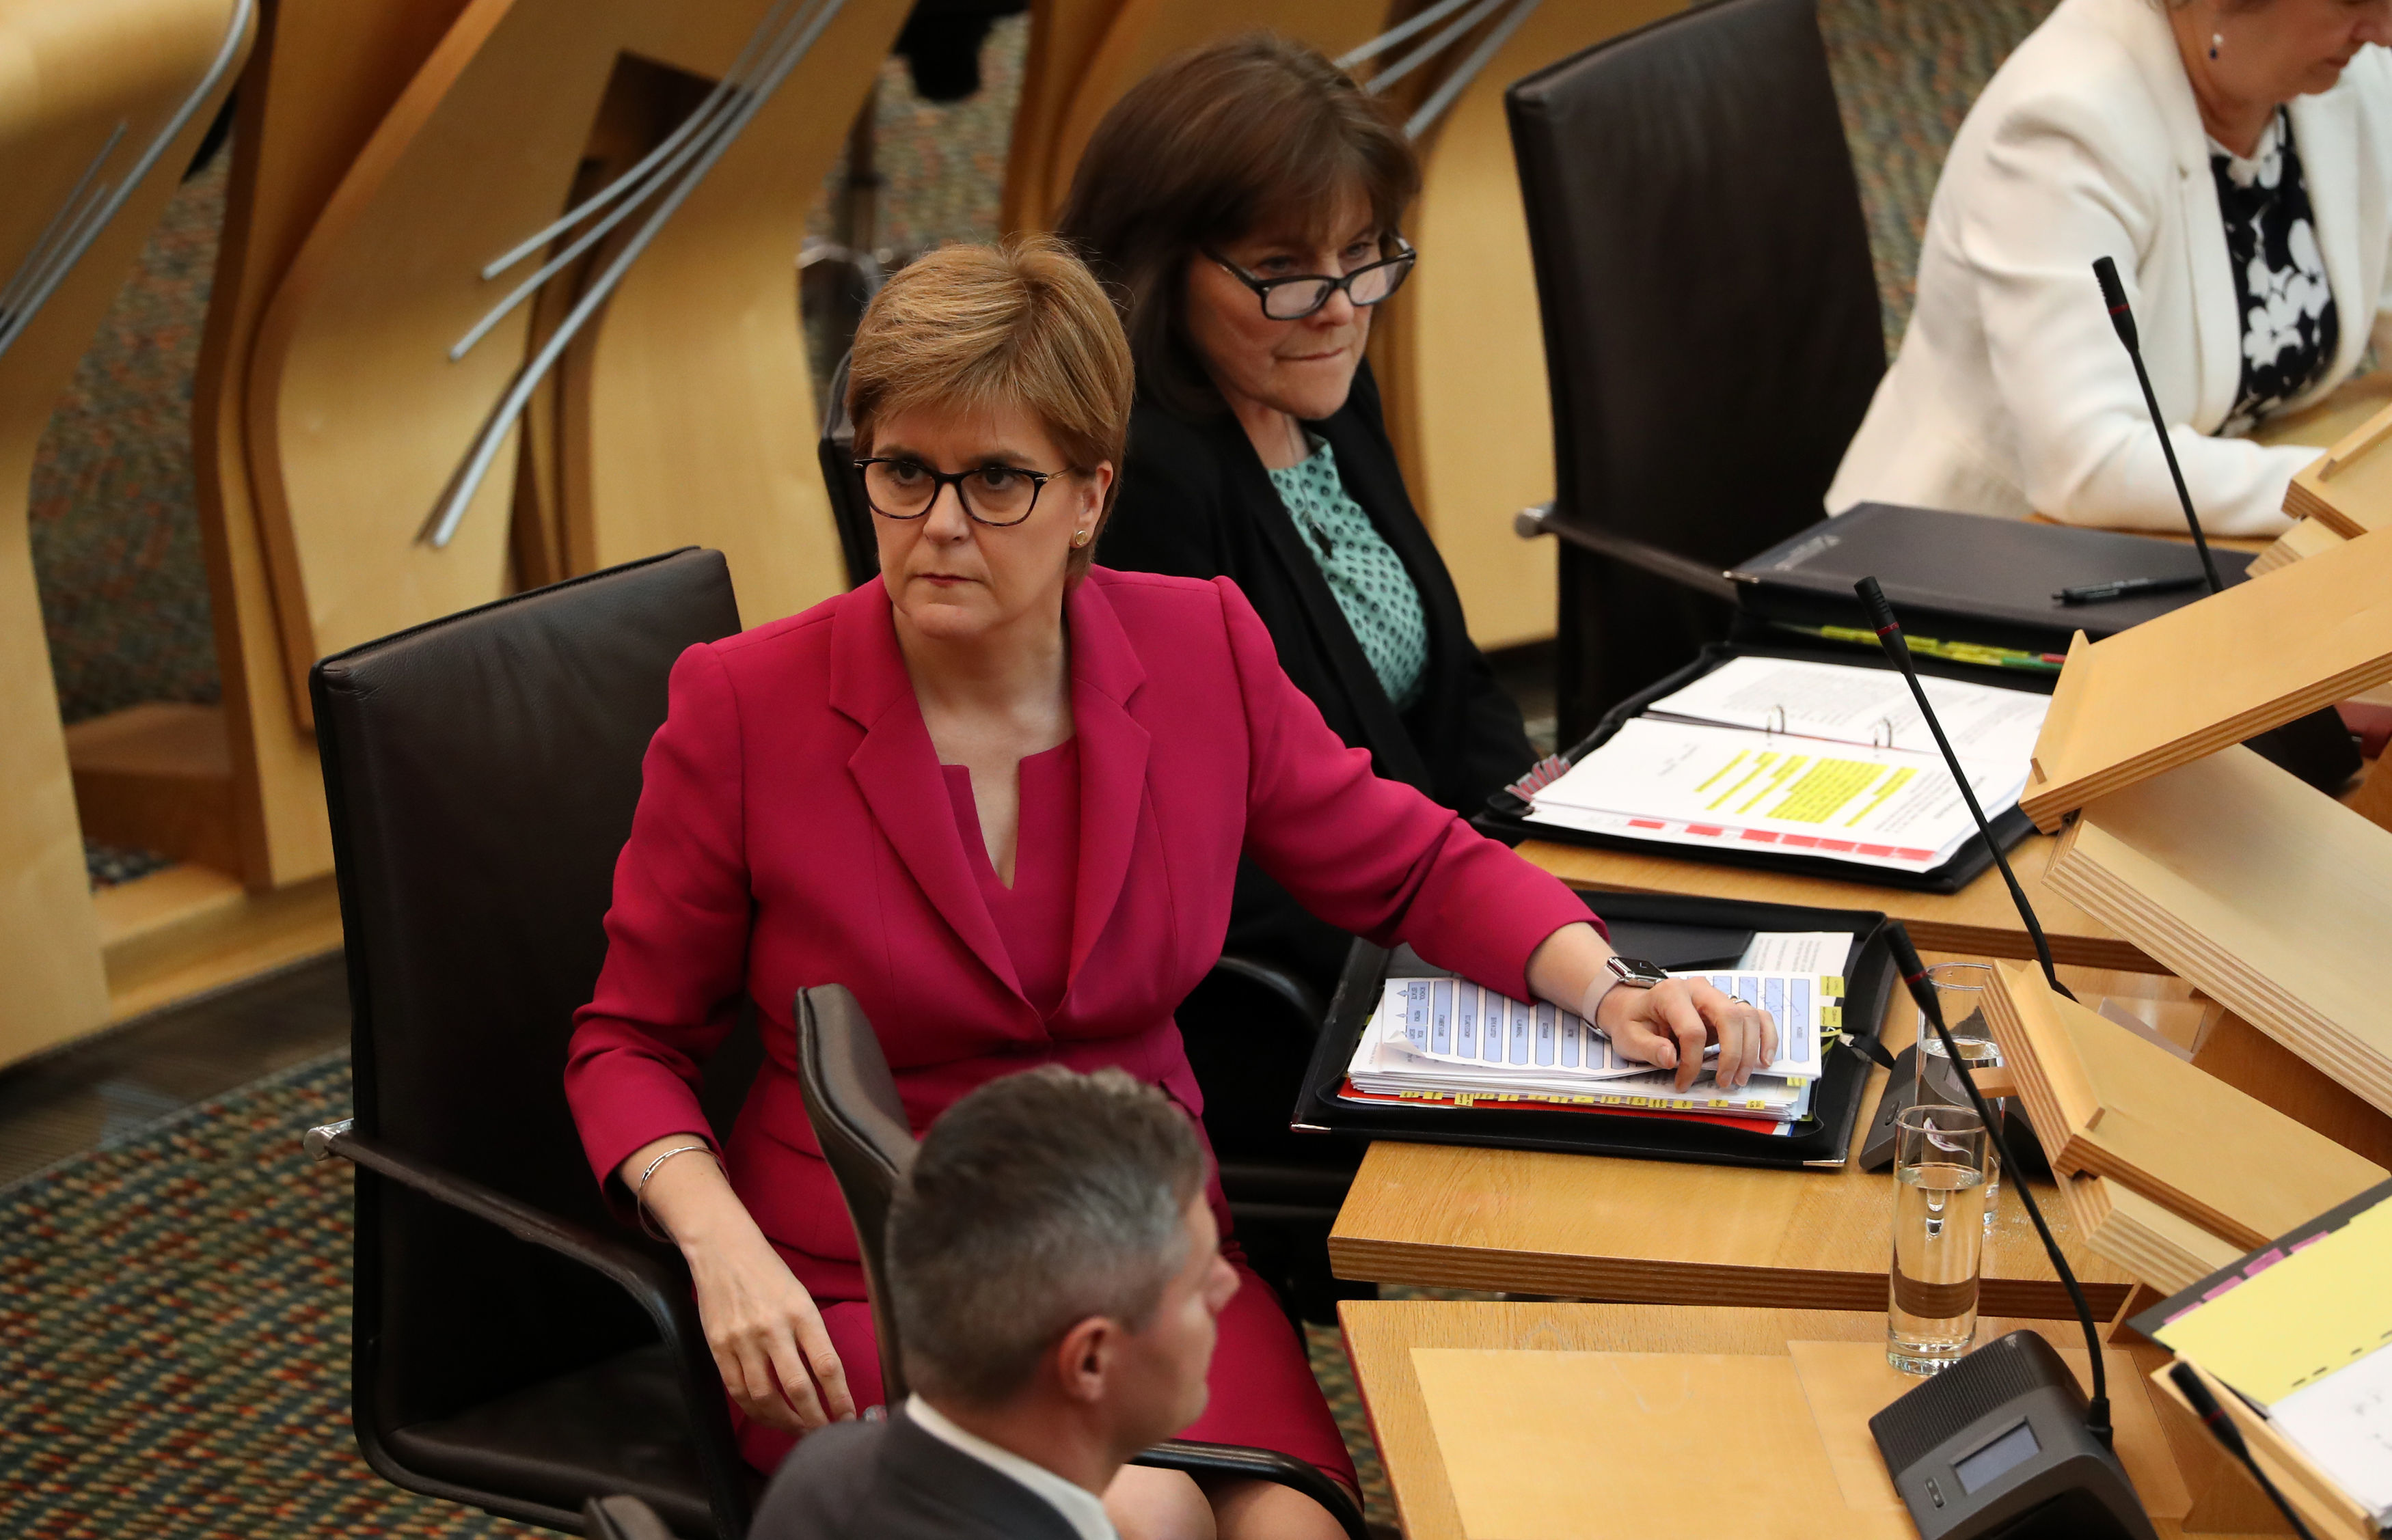 First Minister Nicola Sturgeon alongside Health Secretary Jeane Freeman in the debating chamber during First Minister's Questions at the Scottish Parliament in Edinburgh.